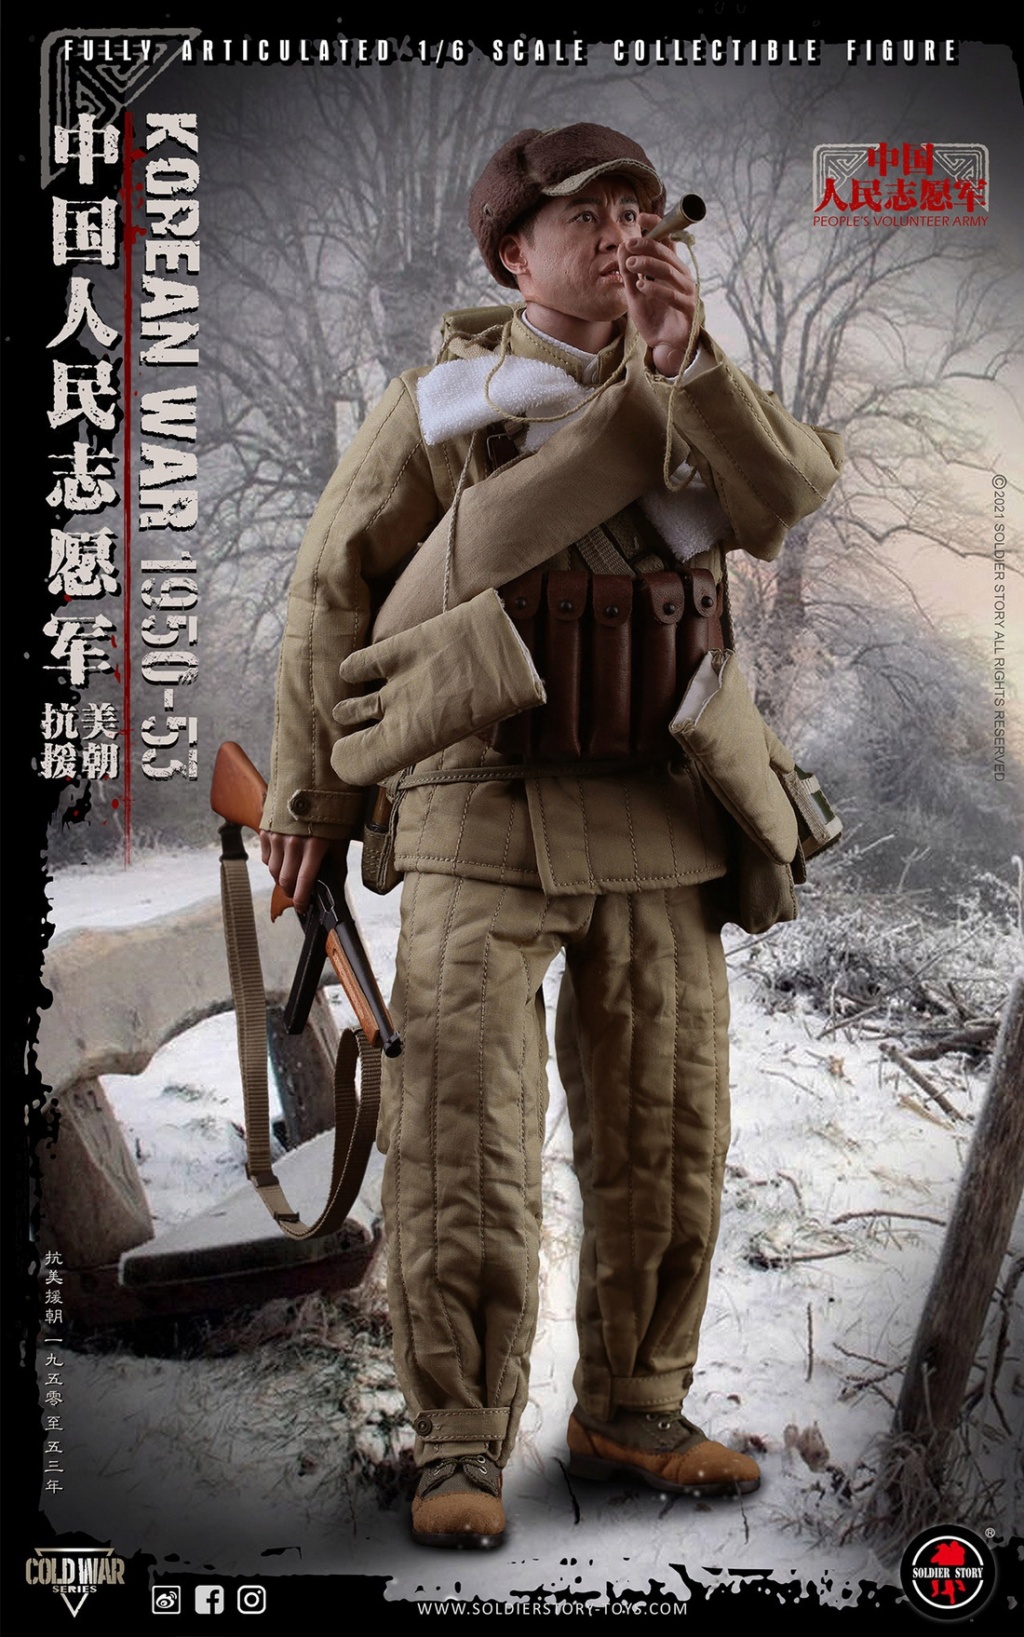 NEW PRODUCT: SOLDIER STORY: 1/6 Chinese People’s Volunteers 1950-53 Collectible Action Figure (#SS-124) 69bd8310